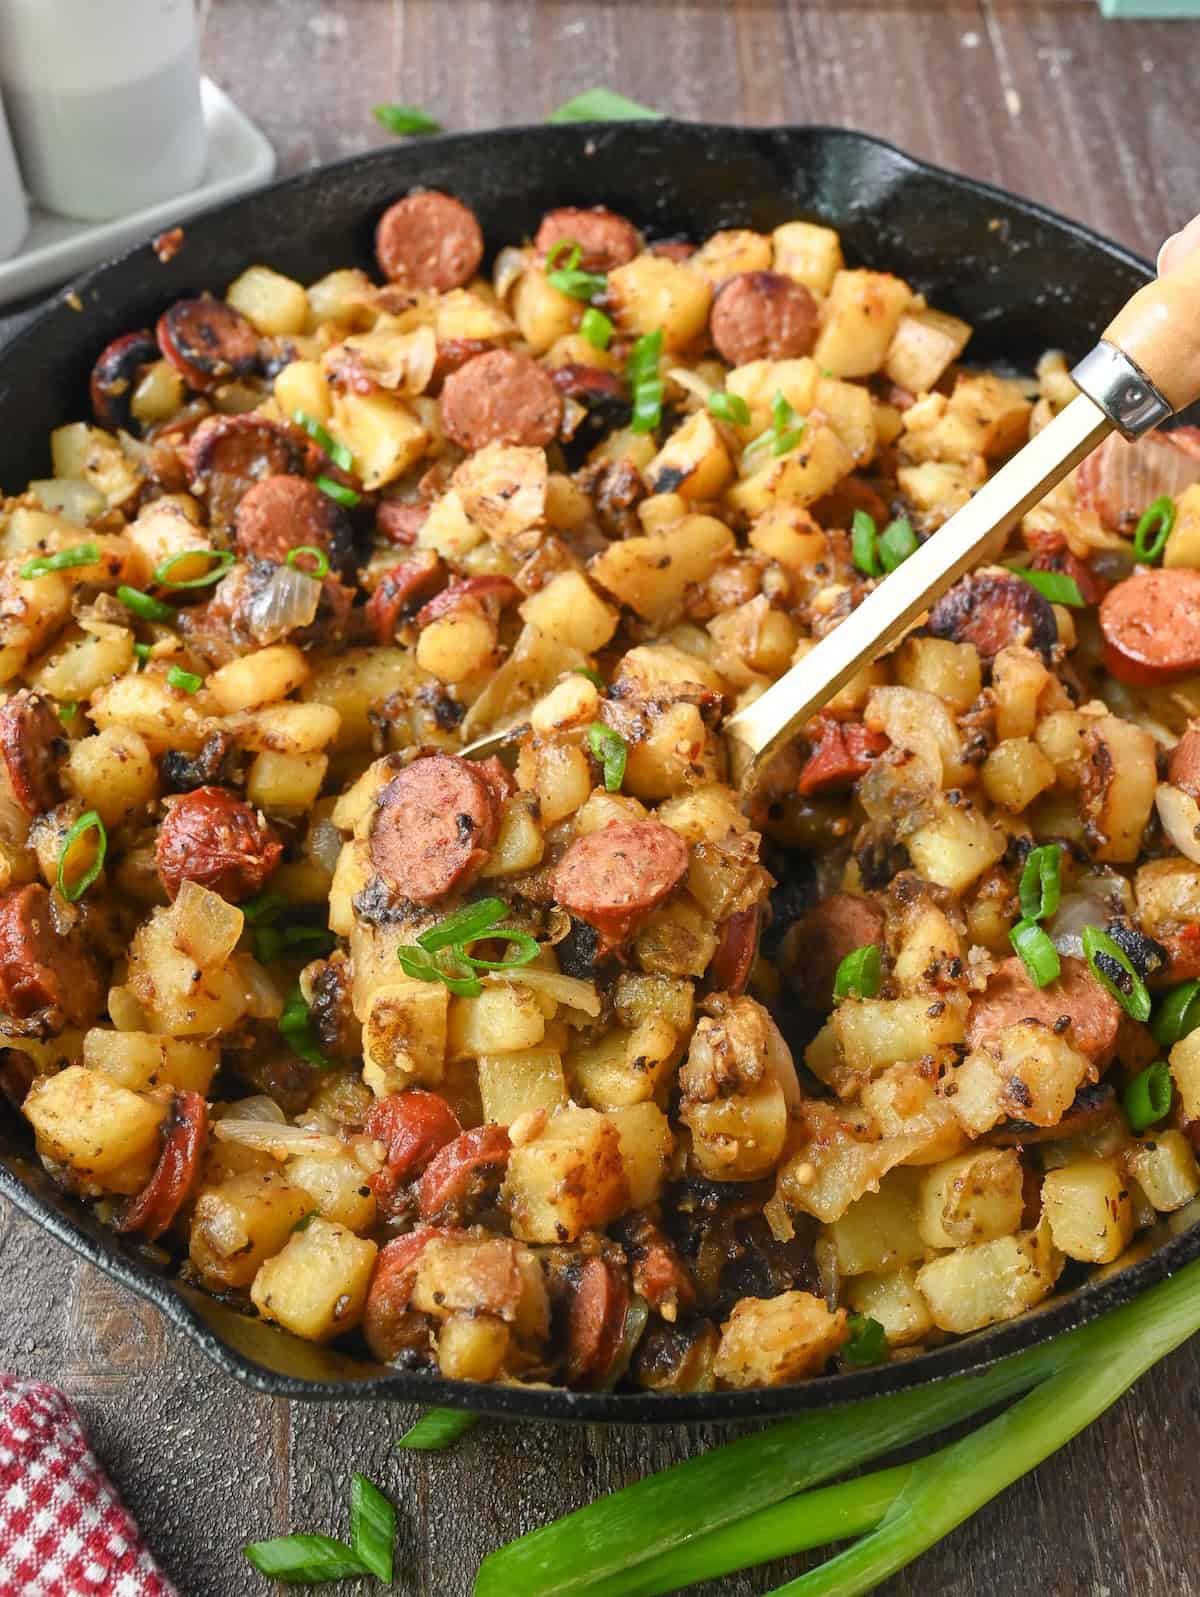 A spoon scooping out some fried potatoes from a skillet.